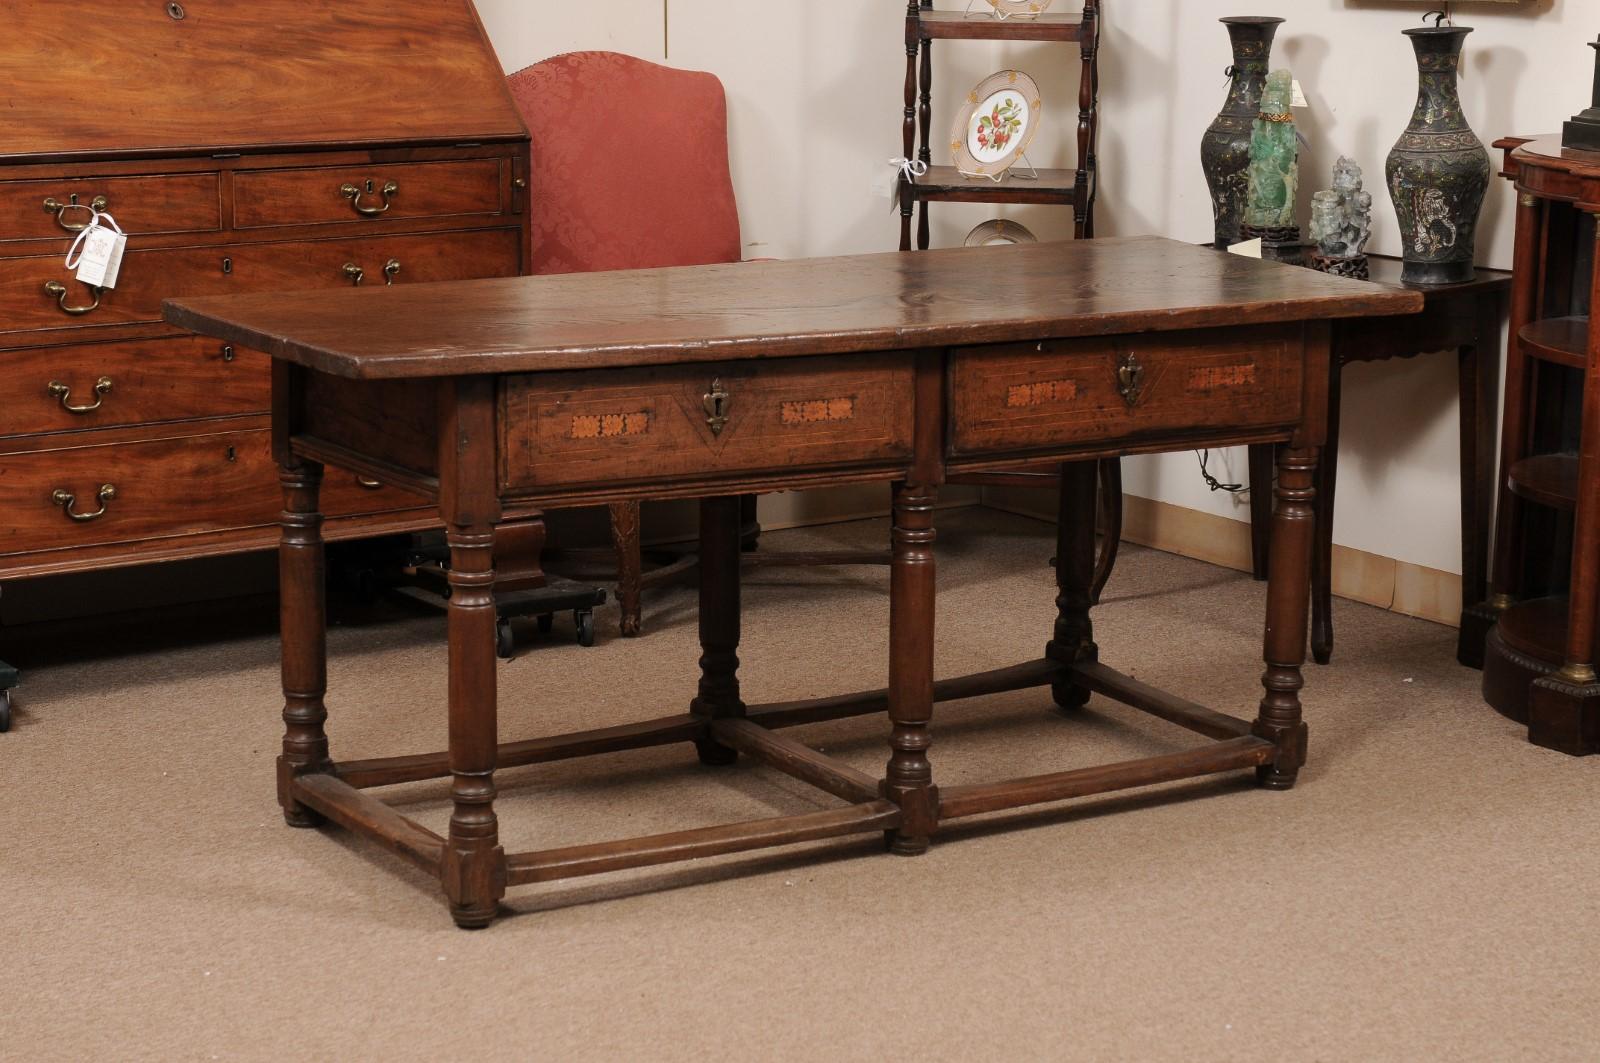  17th Century Italian Refractory Table in Elm with Inlay, 2 Drawers & Turned Leg In Good Condition For Sale In Atlanta, GA